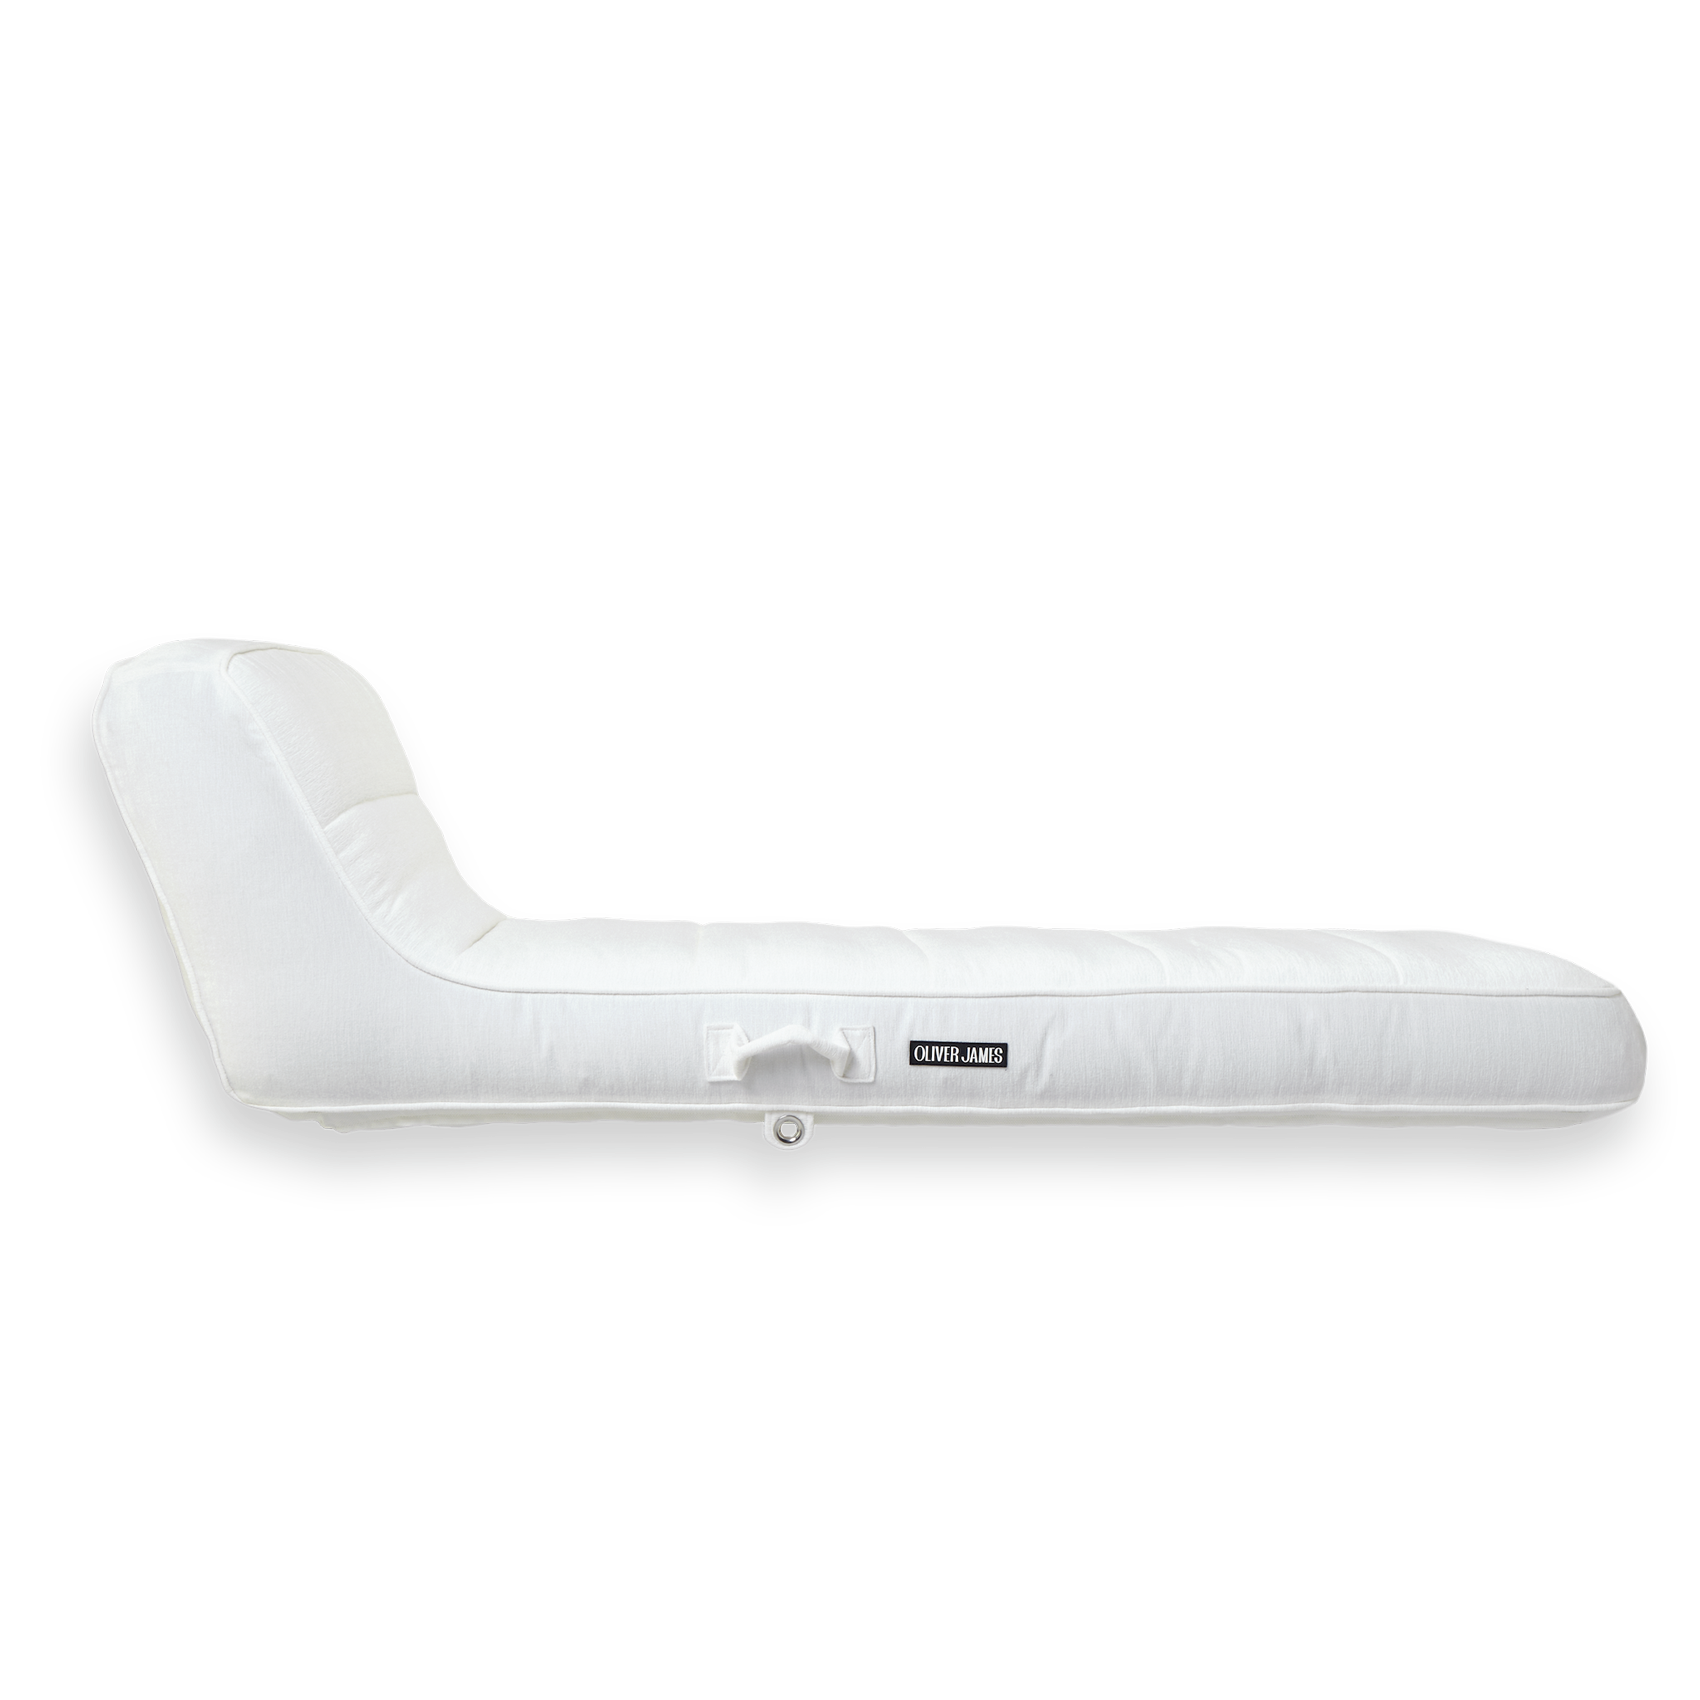 The side profile and backrest angle of a single white terry toweled luxury pool float.